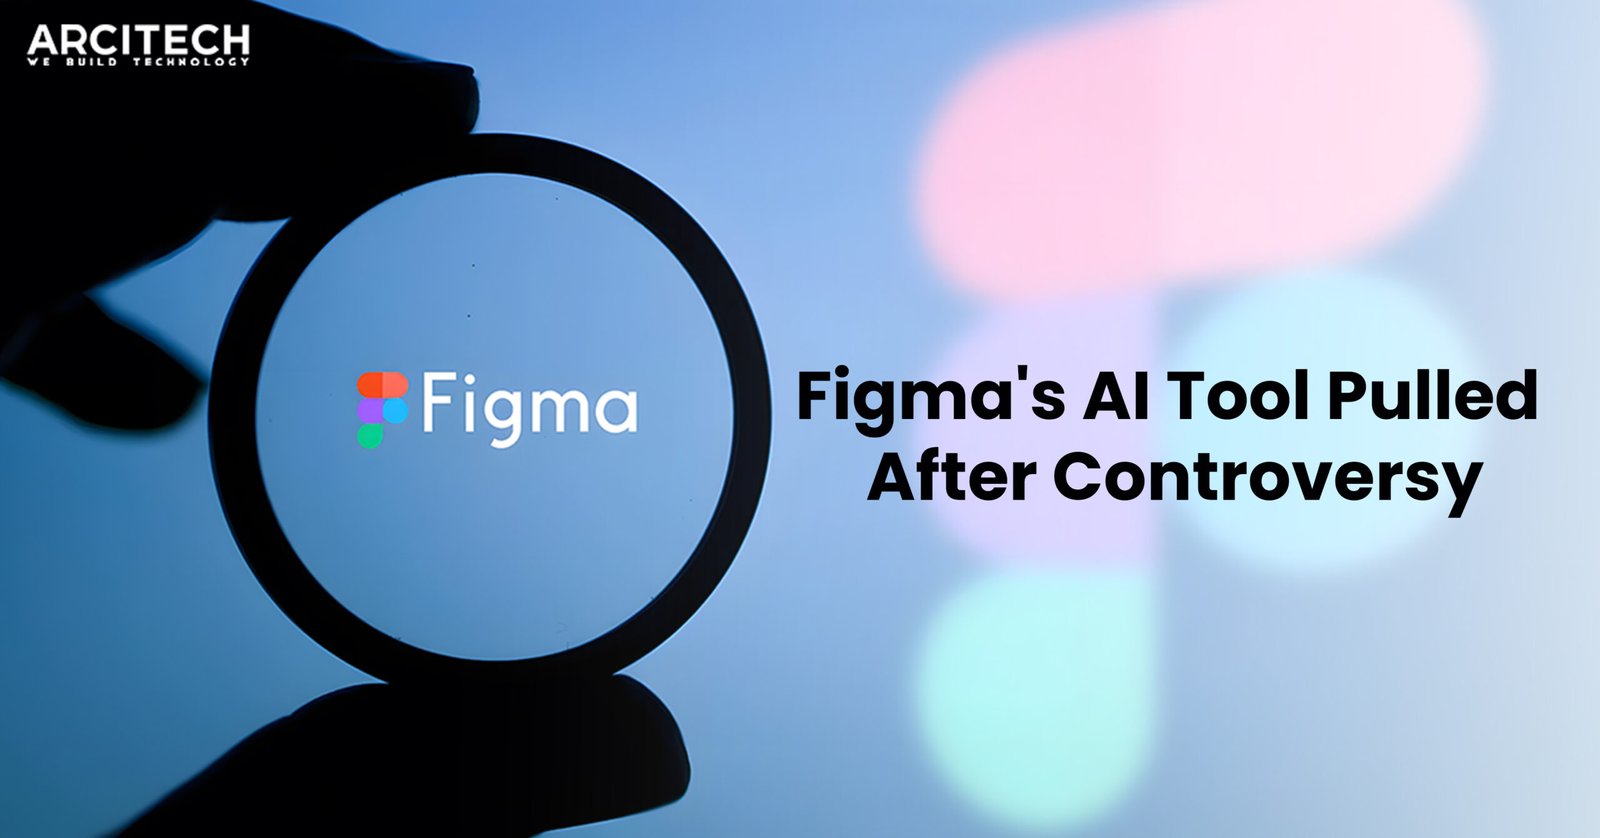 Figma logo magnified with text 'Figma's AI Tool Pulled After Controversy.